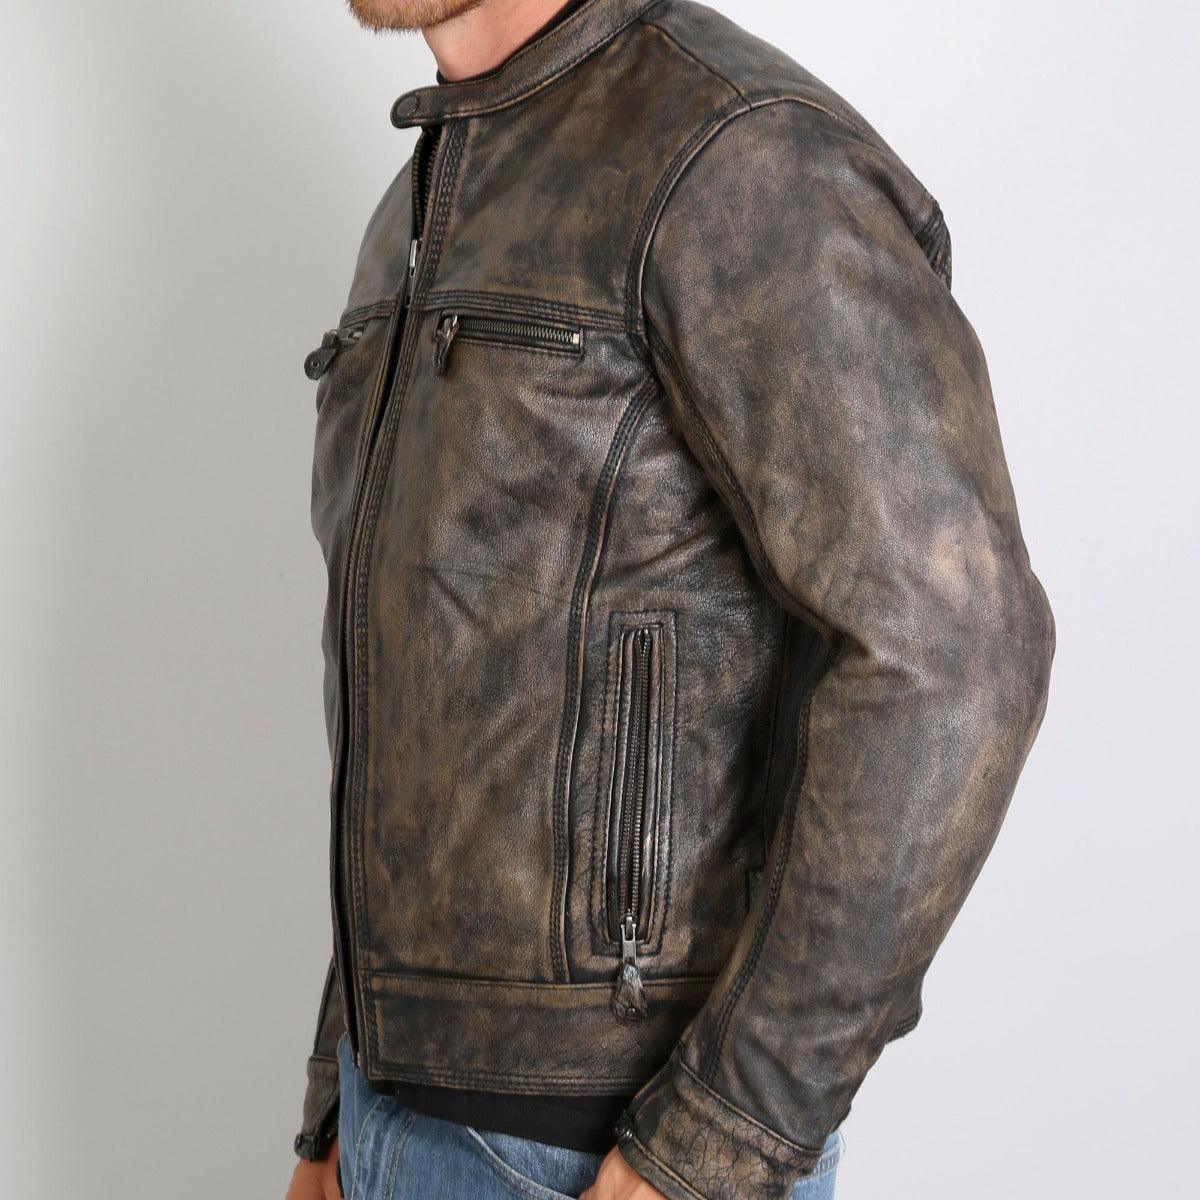 Hot Leathers Men's Heritage Collection Brown Leather Jacket - American Legend Rider